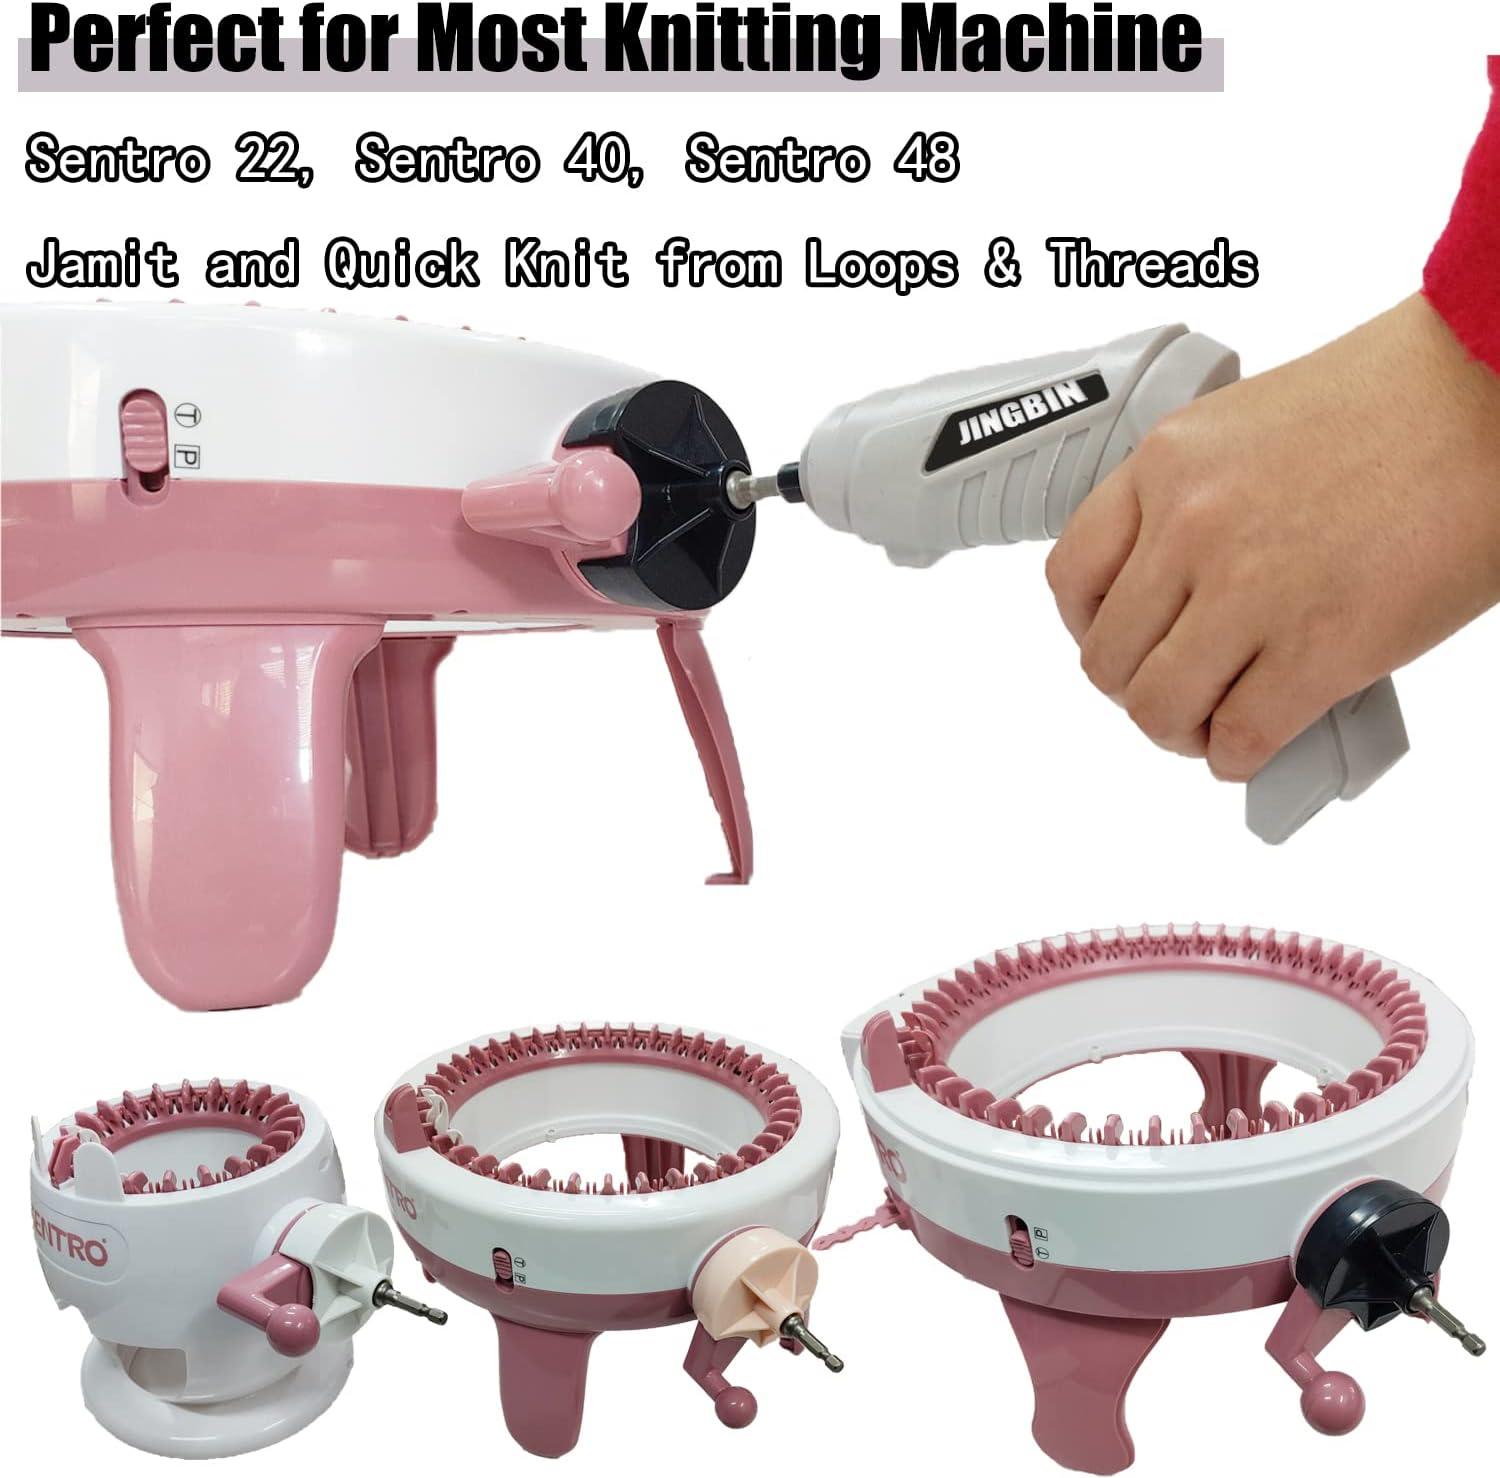 Sentro Knitting Machine with 48 Pins from The Knitting Enthusiast